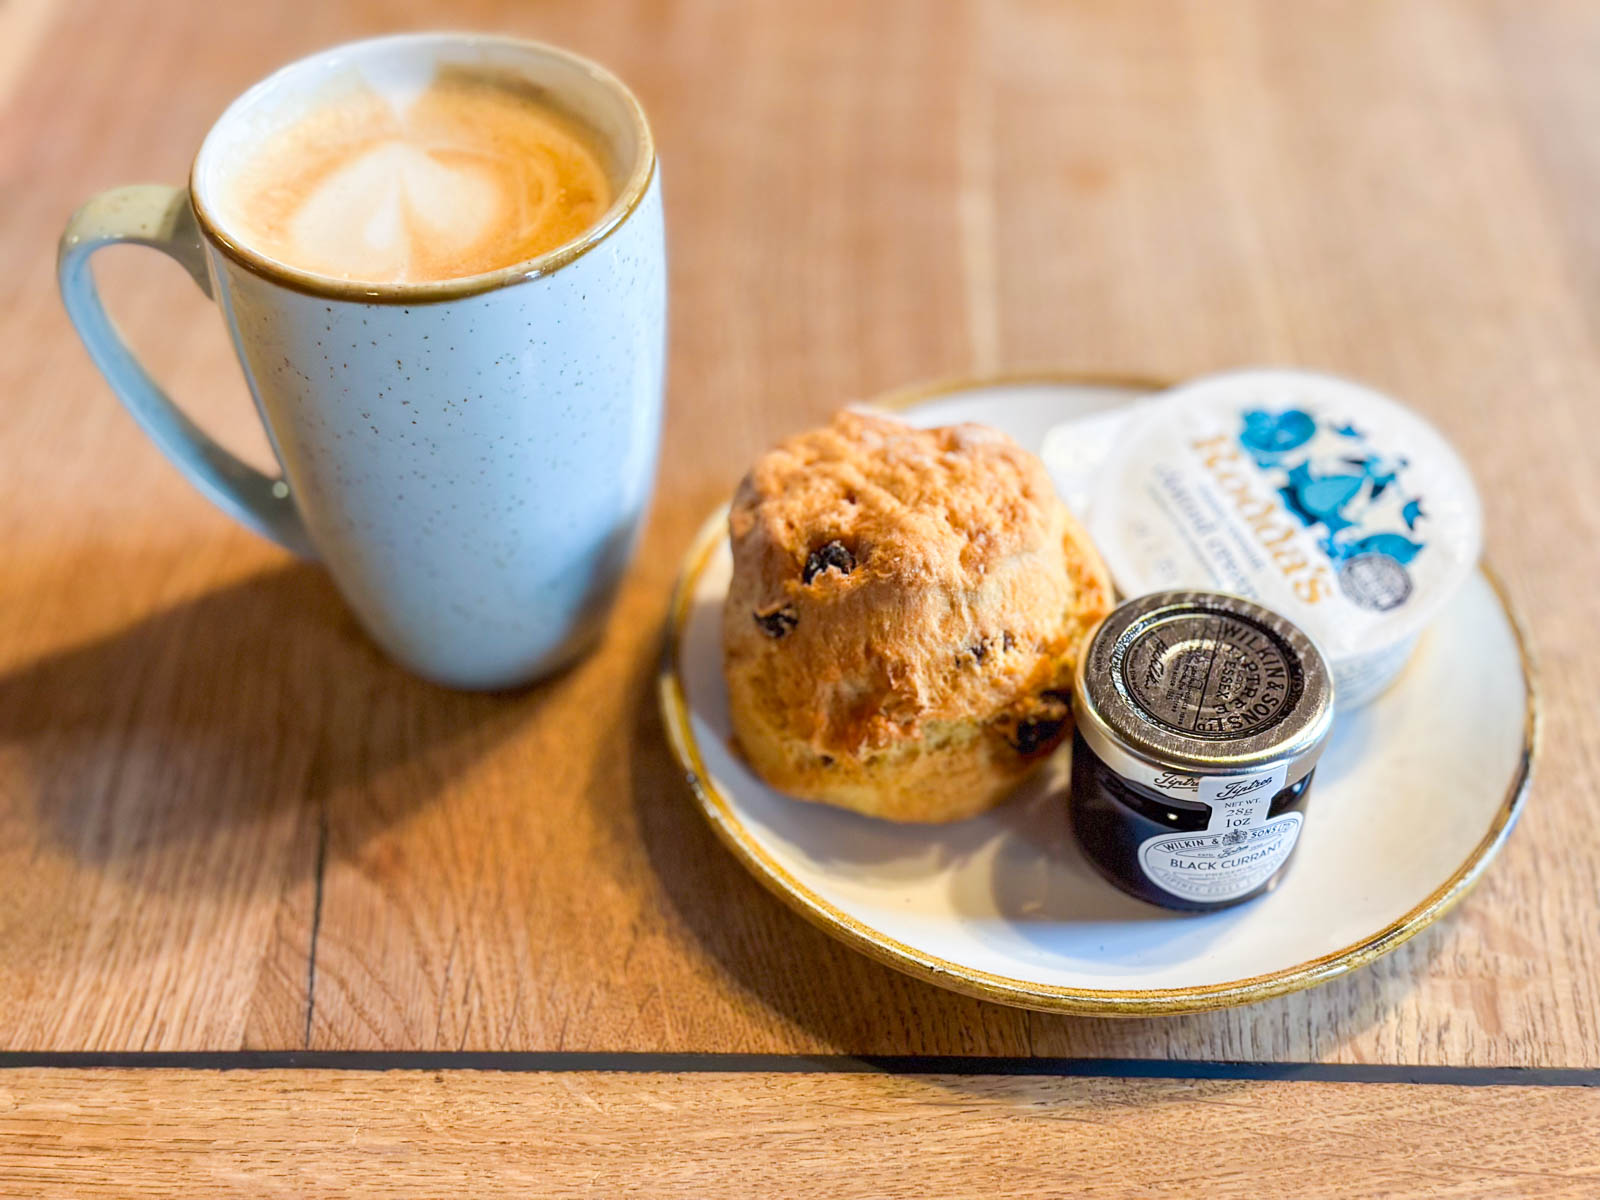 A plate with a scone, jam, and clotted cream sits next to a mug of coffee.